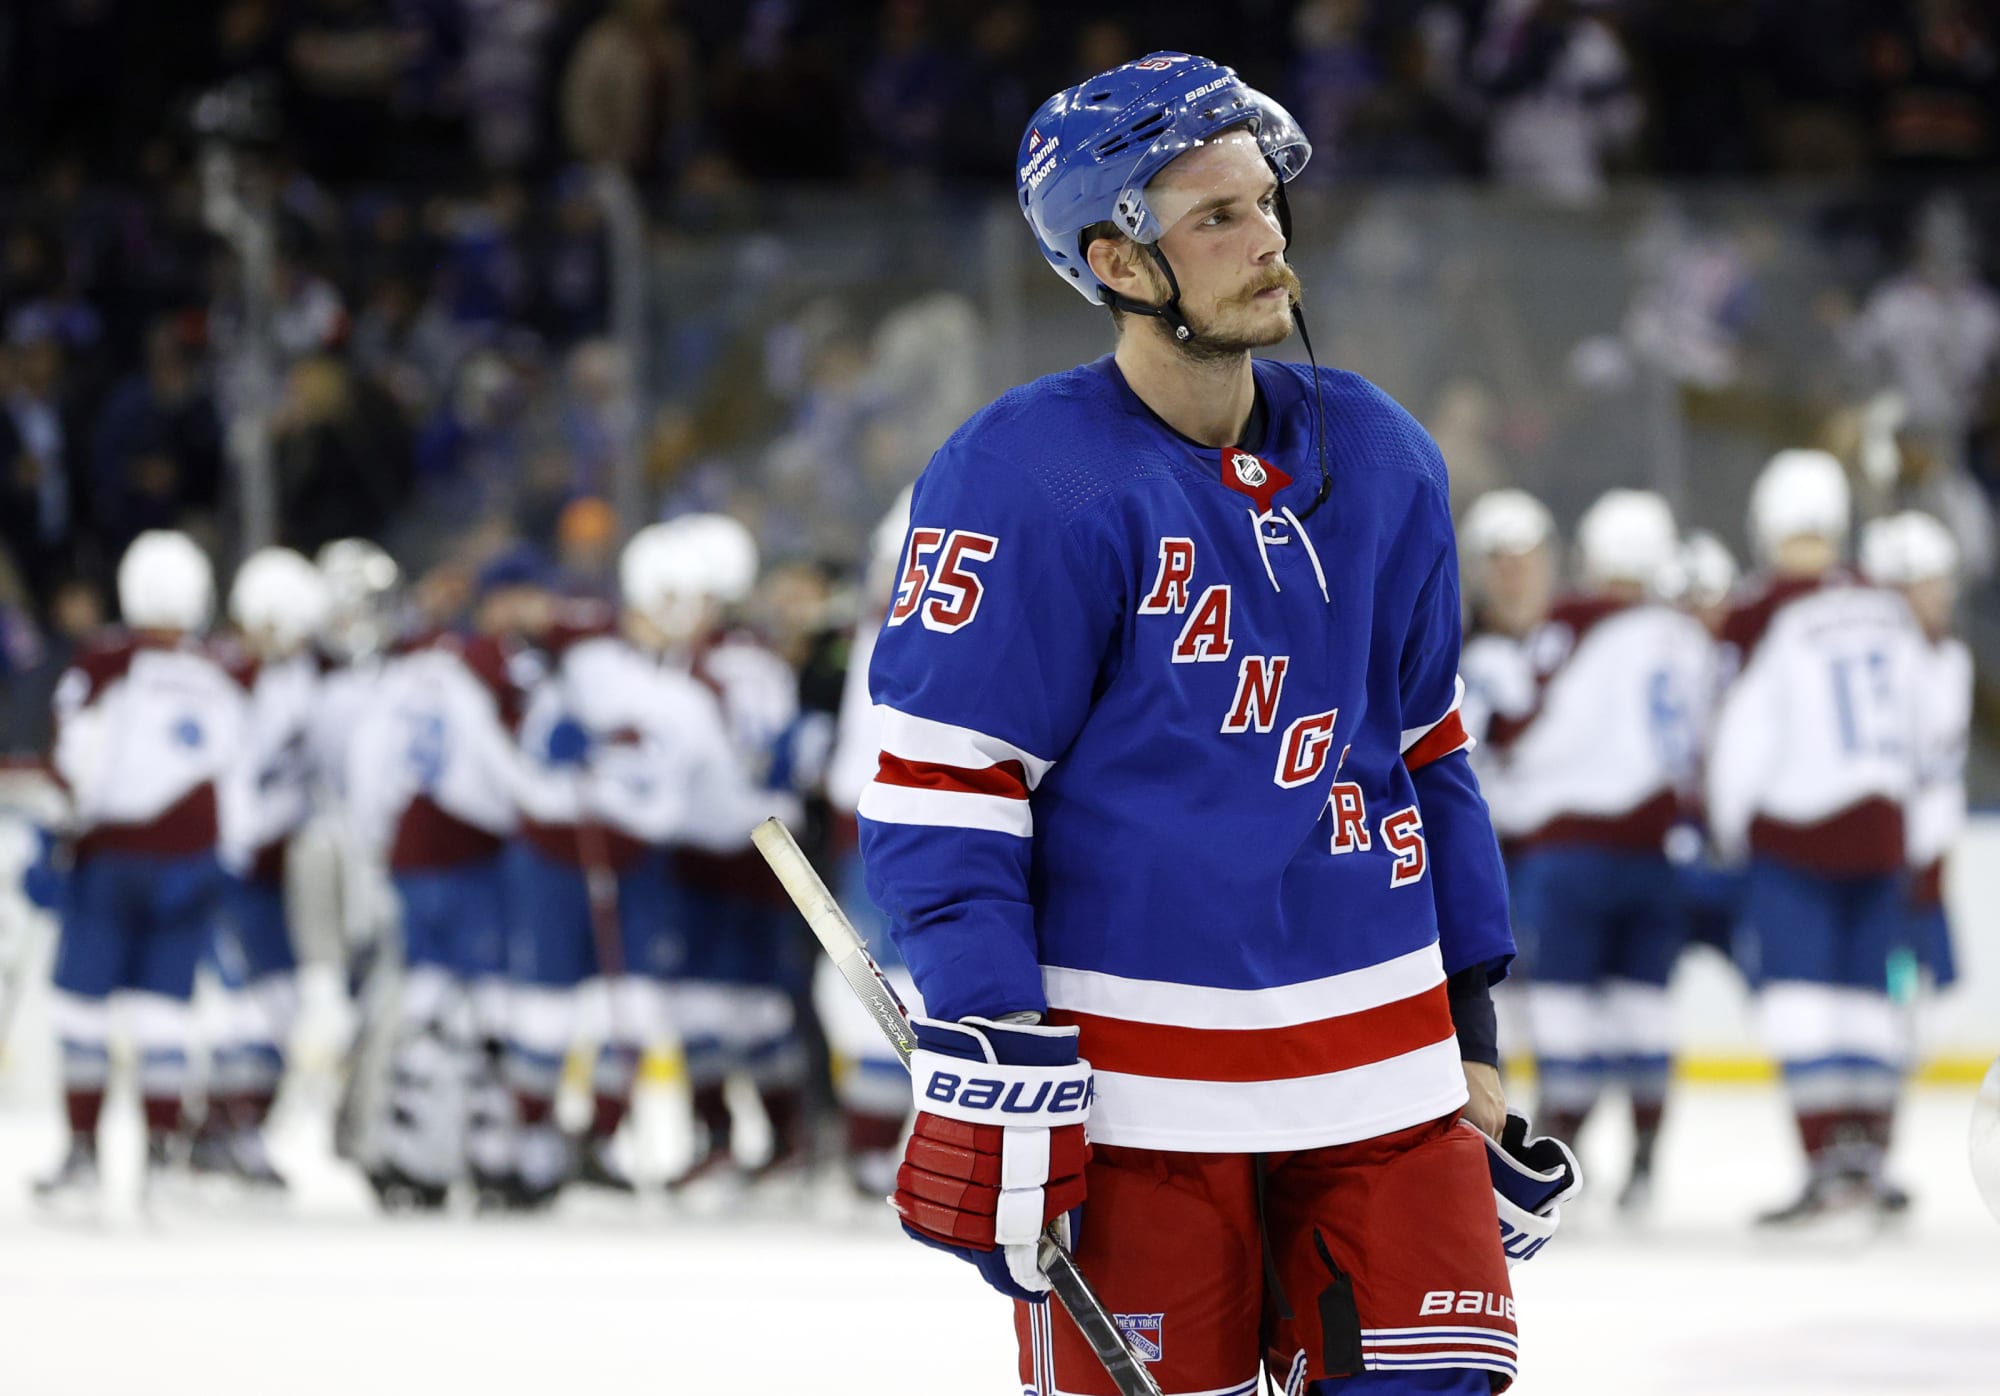 The New York Rangers lose in the shootout to the Colorado Avalanche